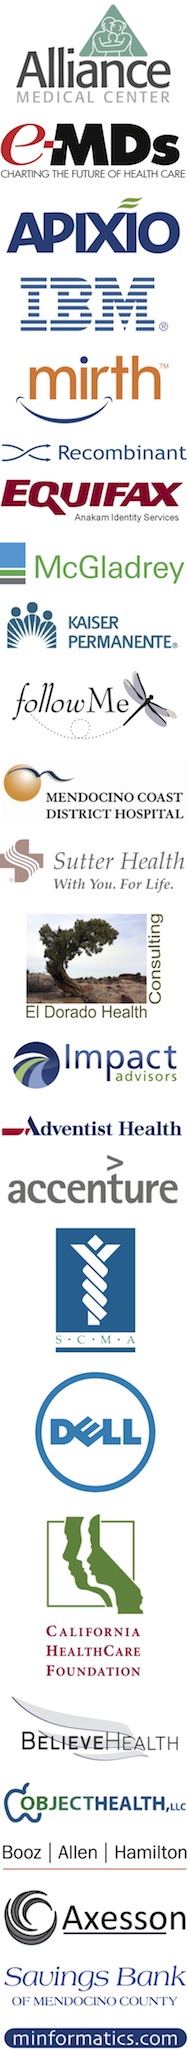 Logos from sponsors of the Redwood MedNet HIE Conference, Summer 2011